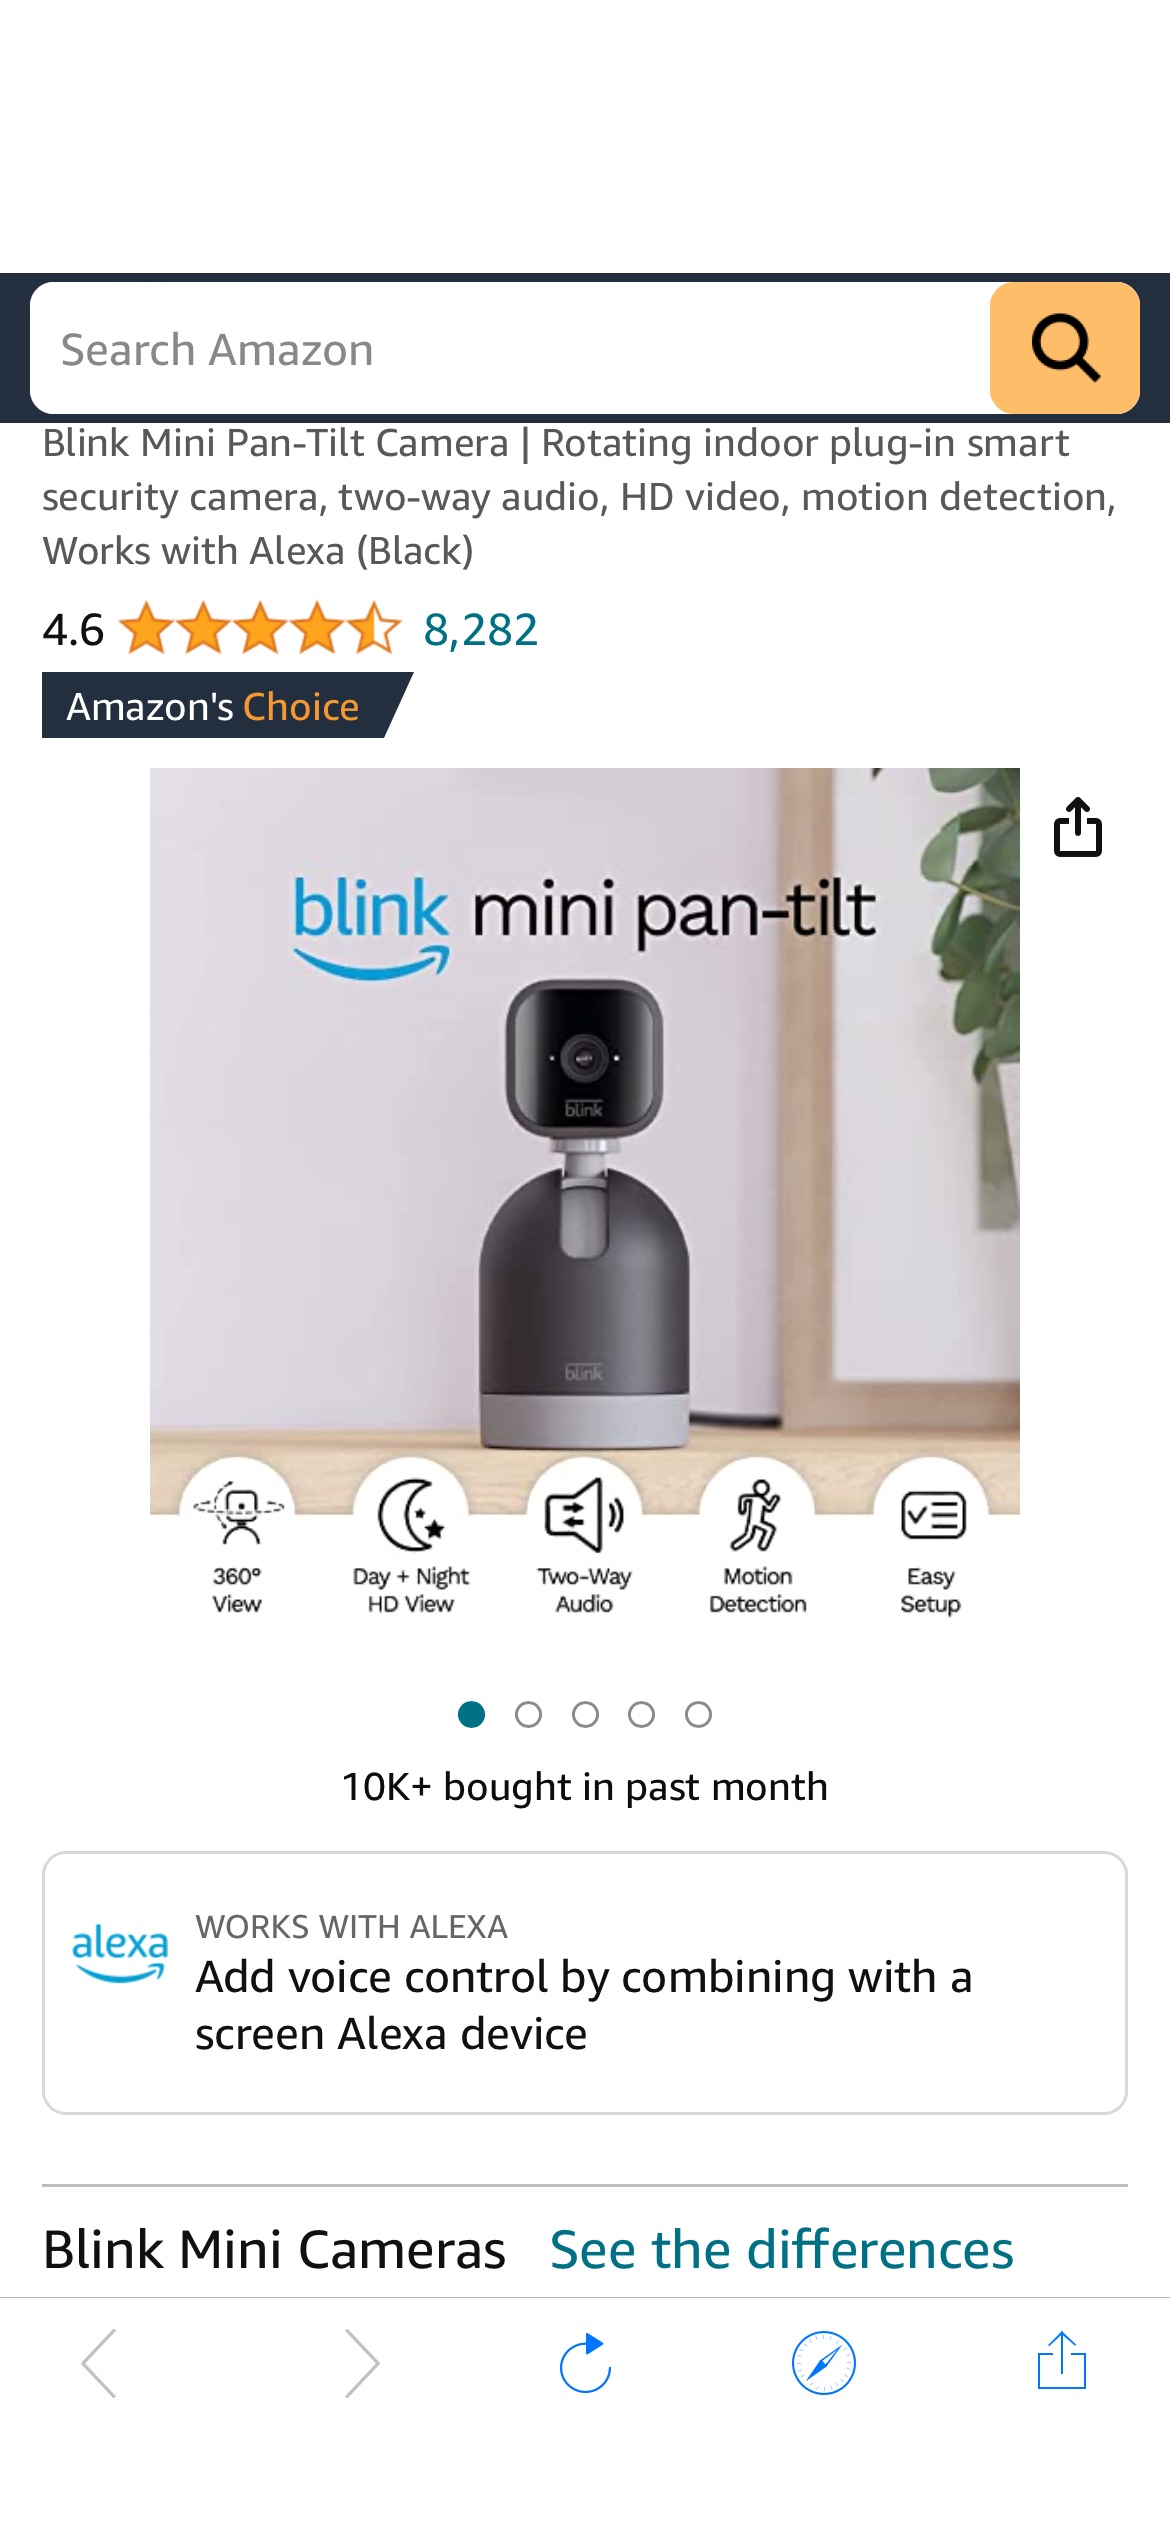 Amazon Official: Blink Mini Pan-Tilt Camera | Rotating indoor plug-in smart security camera, two-way audio, HD video, motion detection, Works with Alexa (Black)